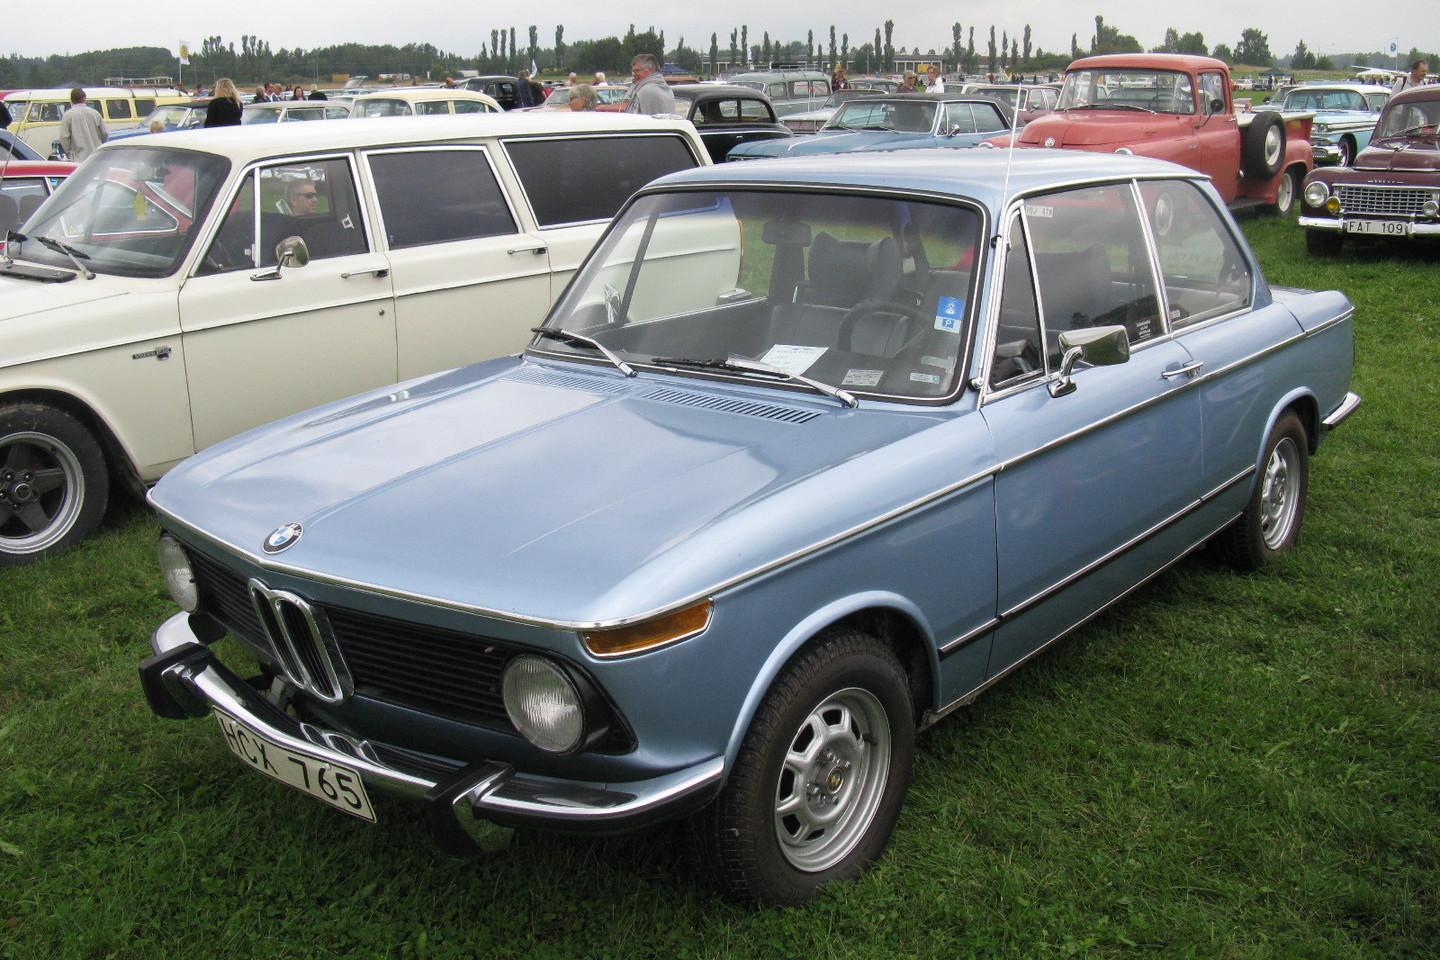 BMW 2002 (1968-1975)<br>Creative commons nuotr.